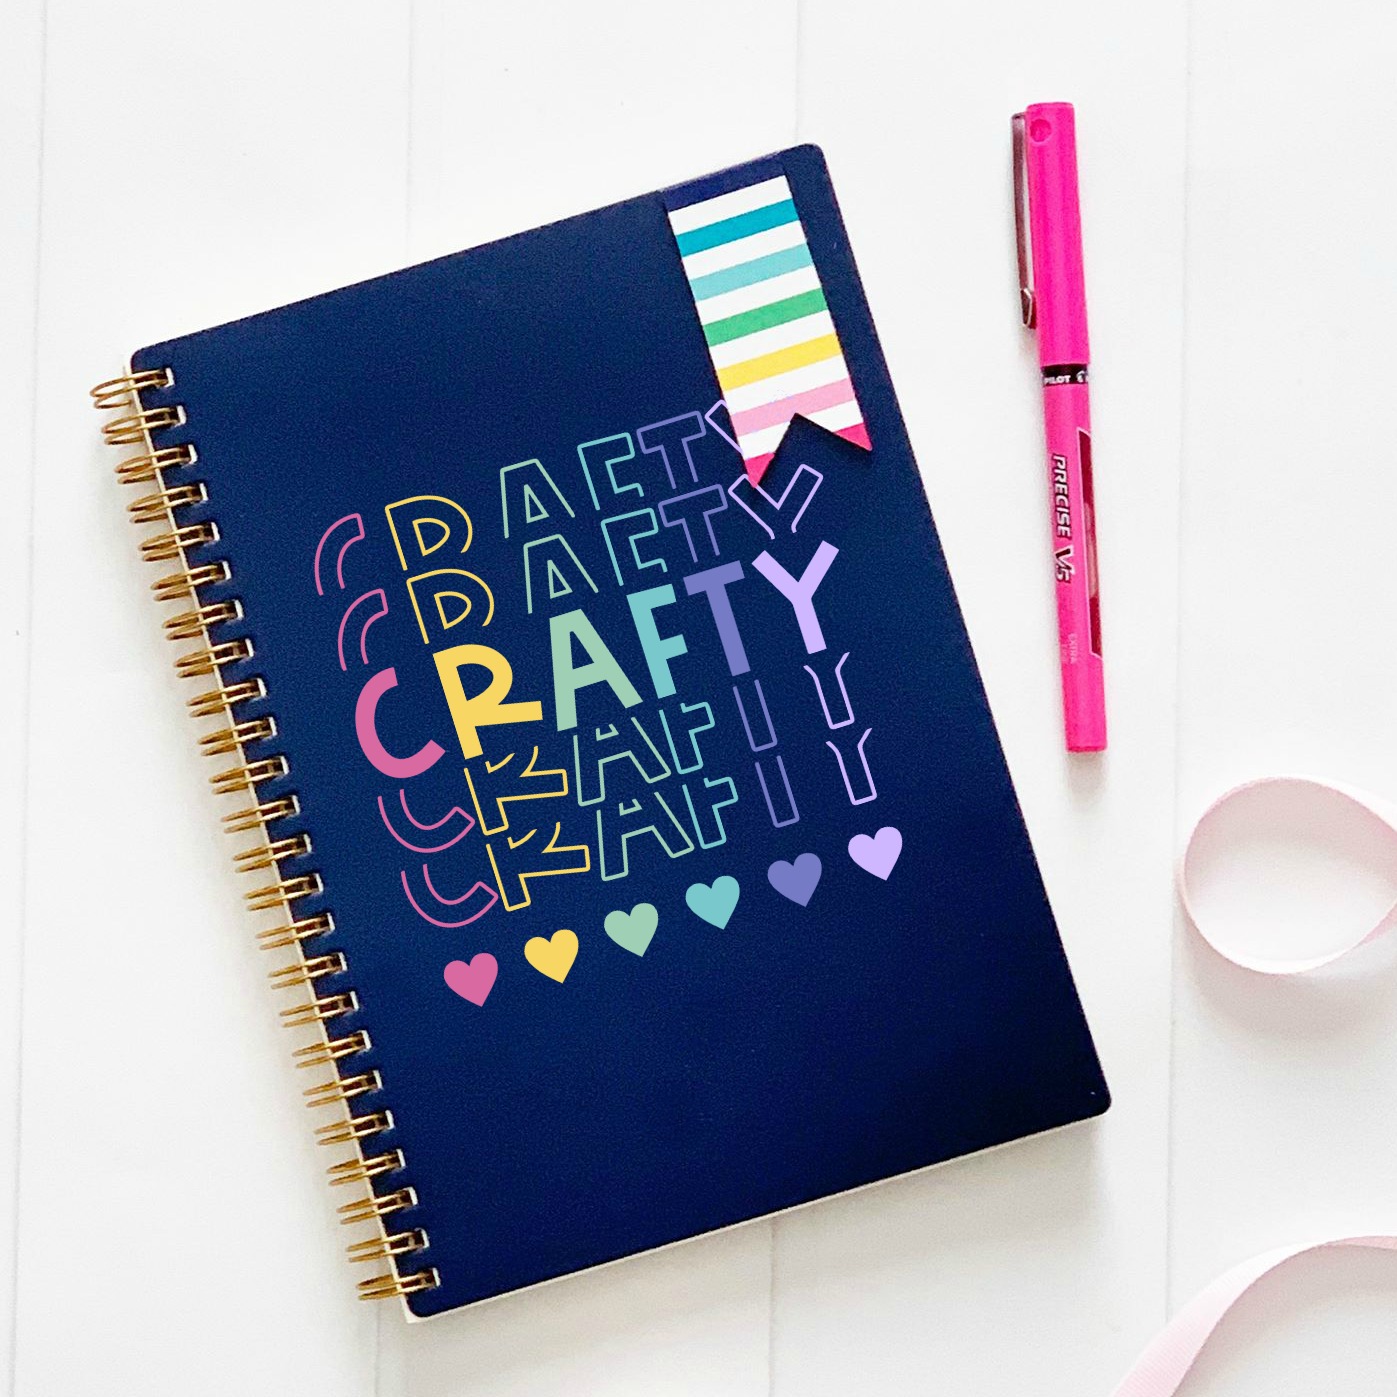 Download 13 Free Craft SVG Files- Our Gift To You! - Hello Creative ...